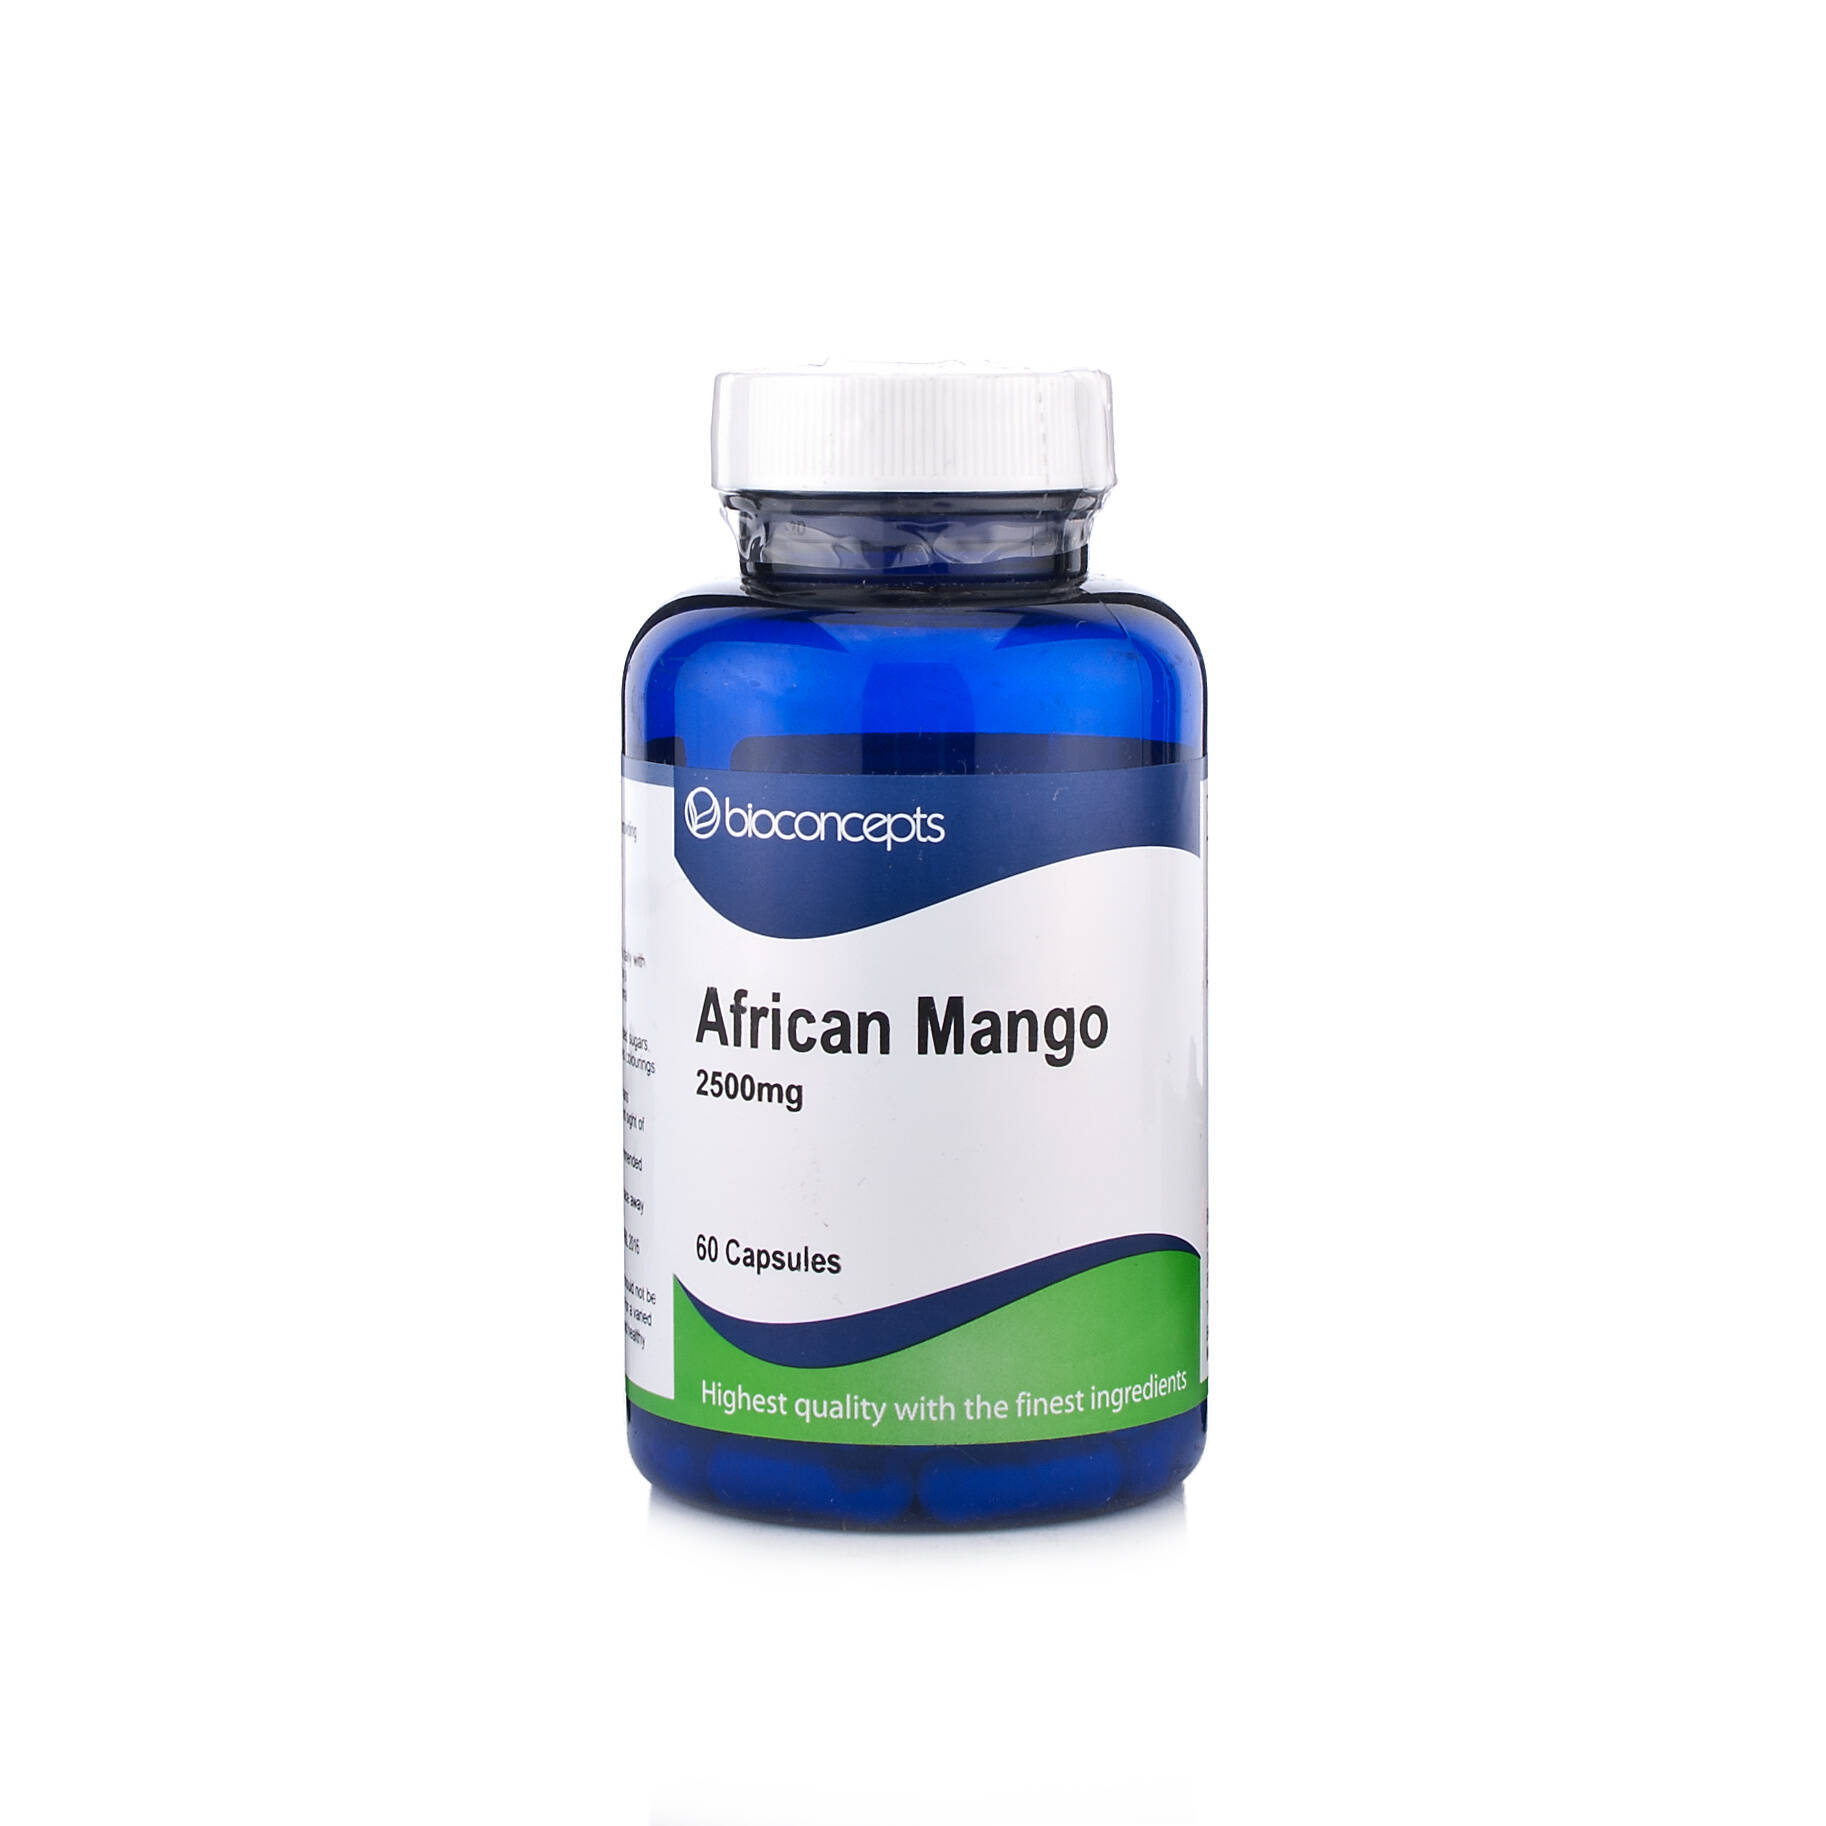 Bioconcepts African Mango Extract 2500mg - 60 capsules